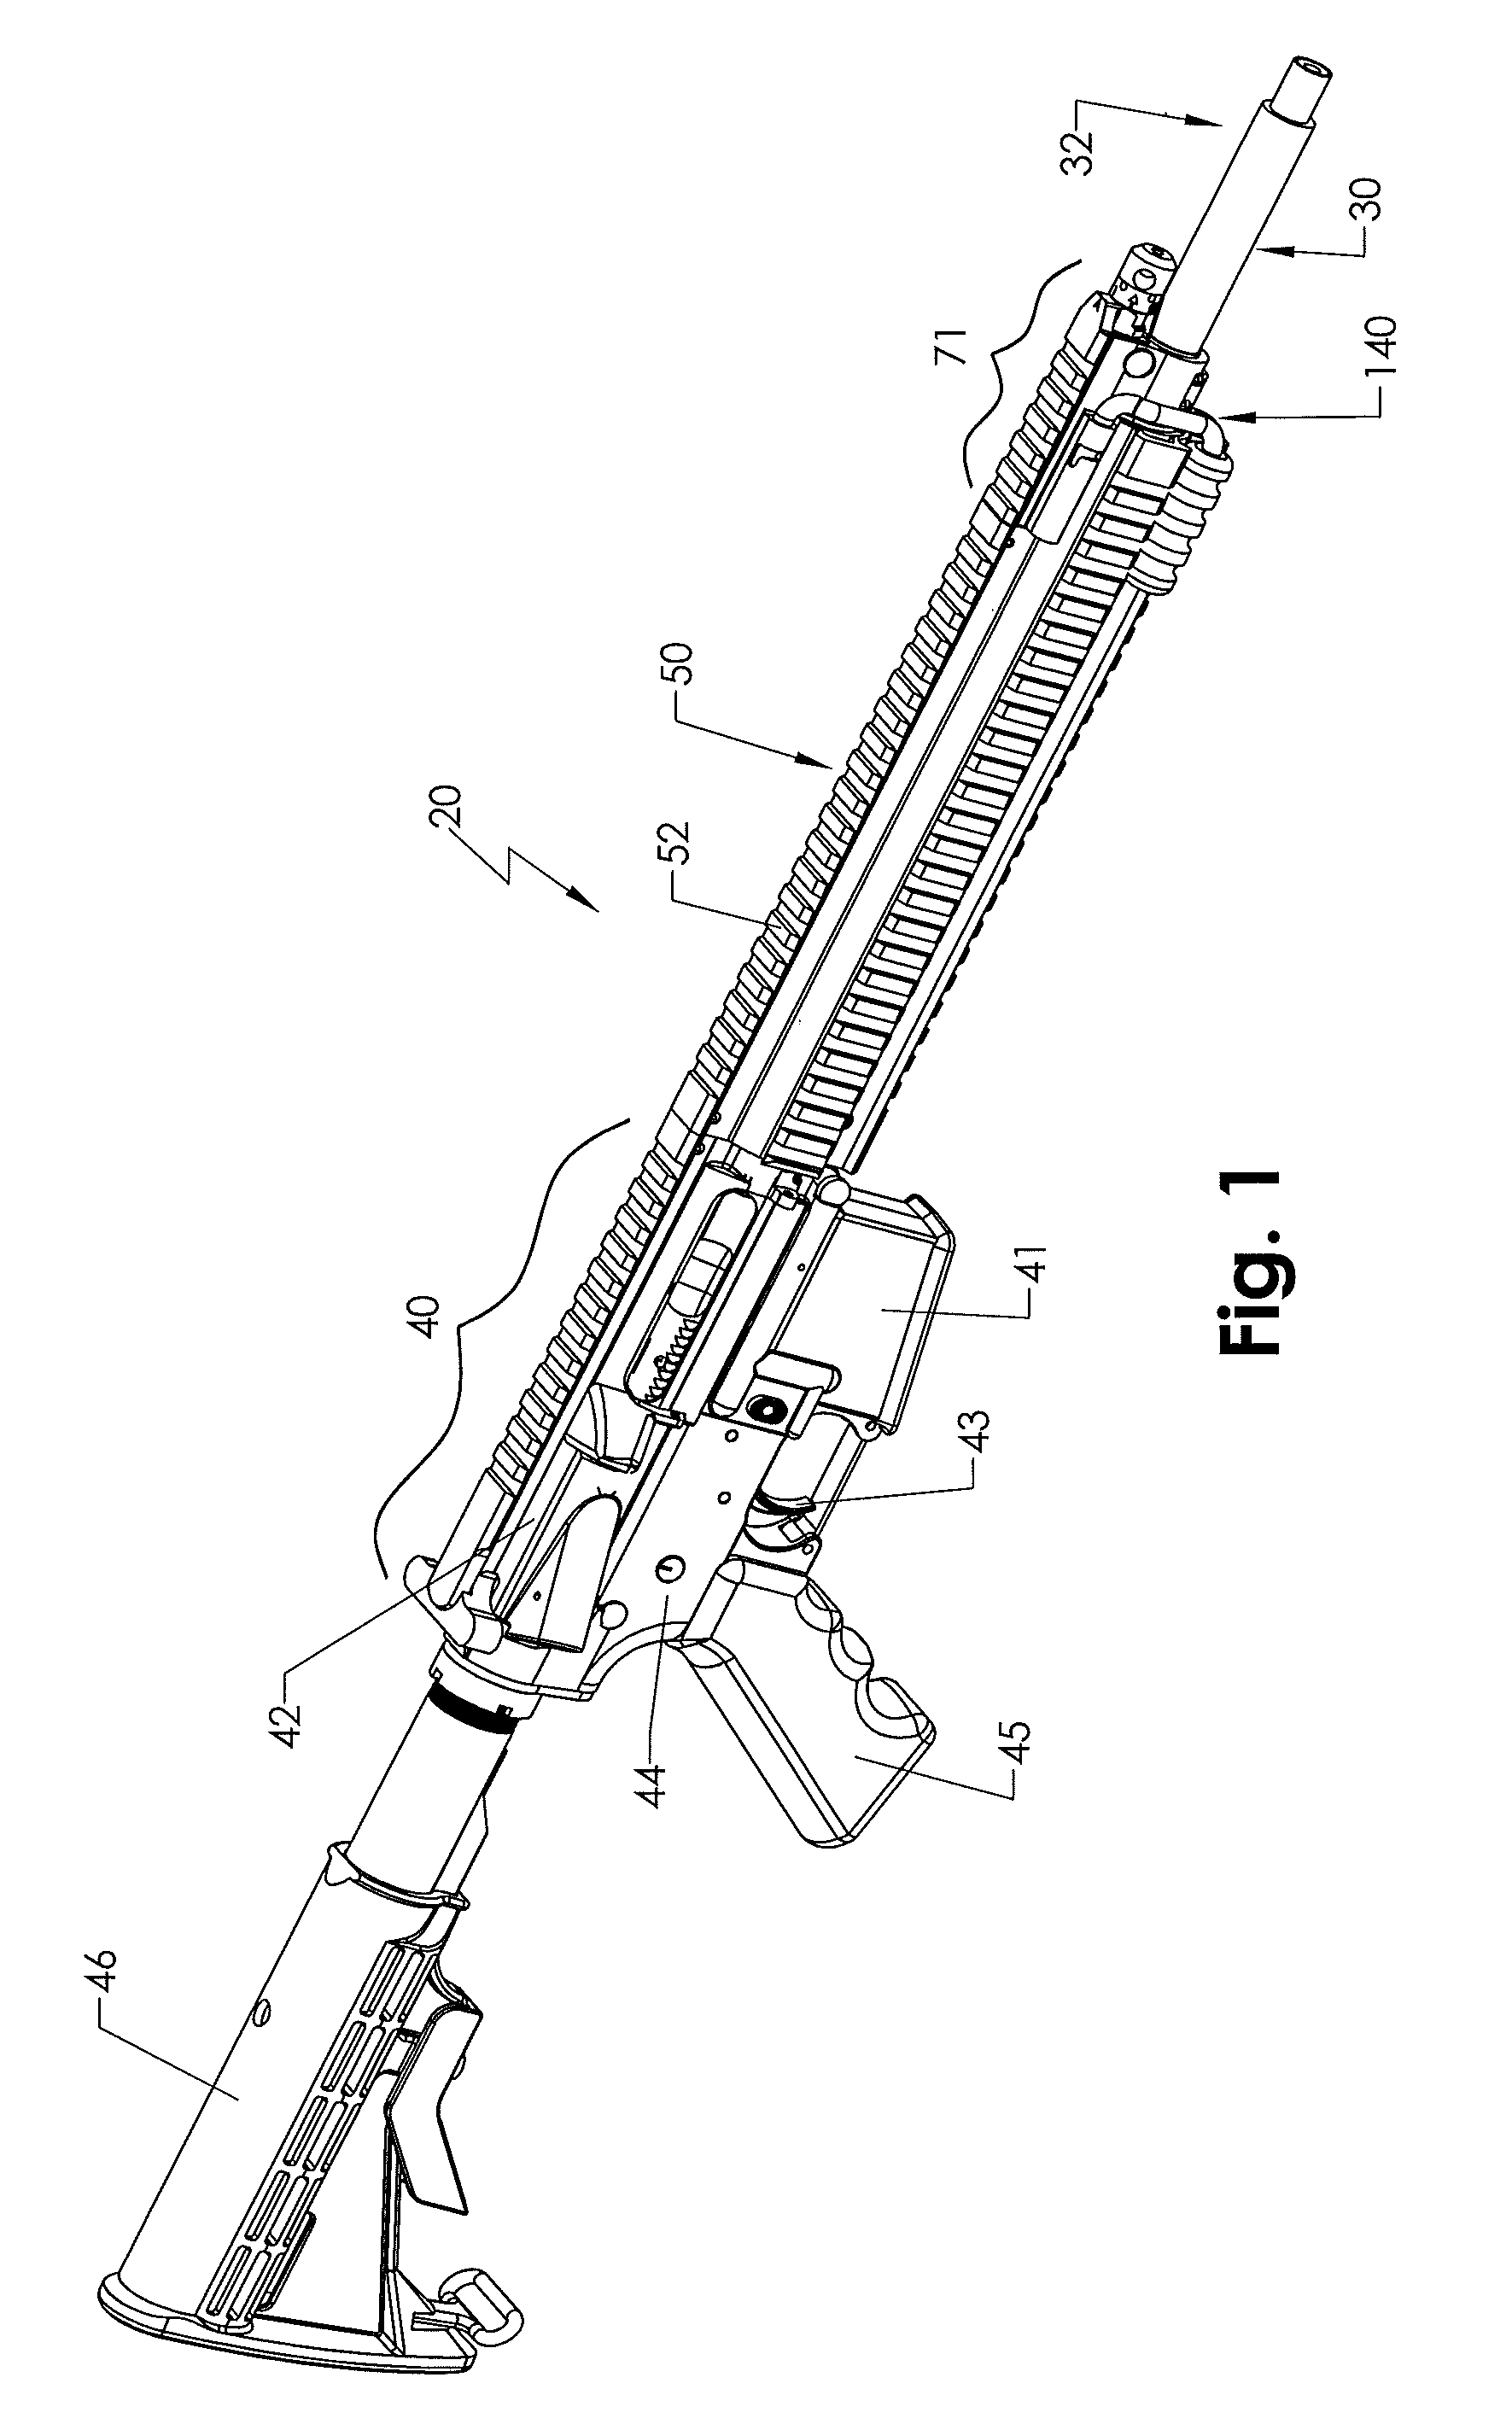 Gas operated rifle with bolt carrier and receiver assembly